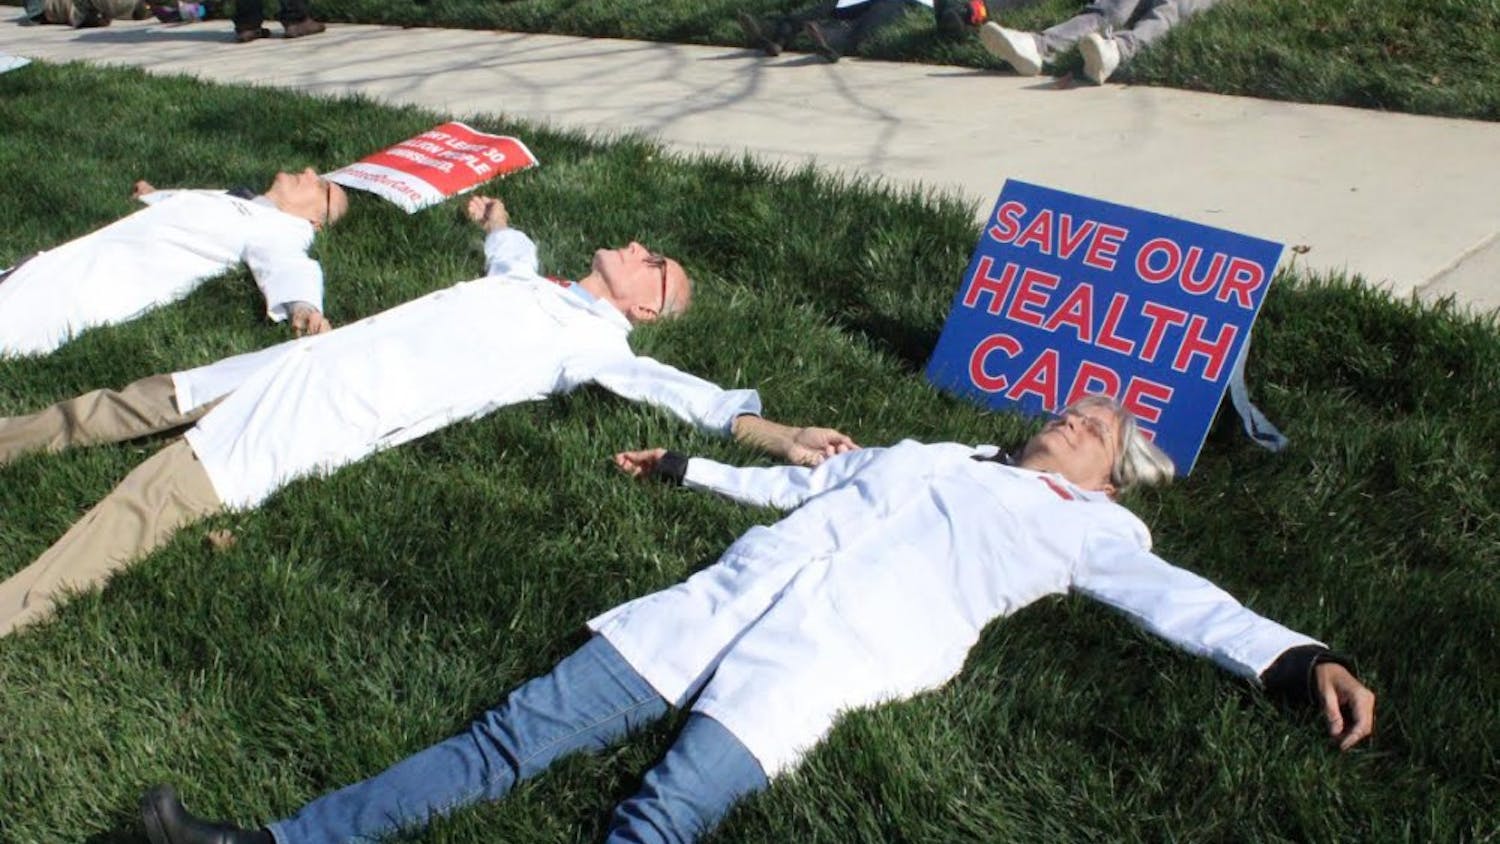 Participants spread out in the grass during Friday’s die-in in Durham in reaction to the possible changes in health care policies.